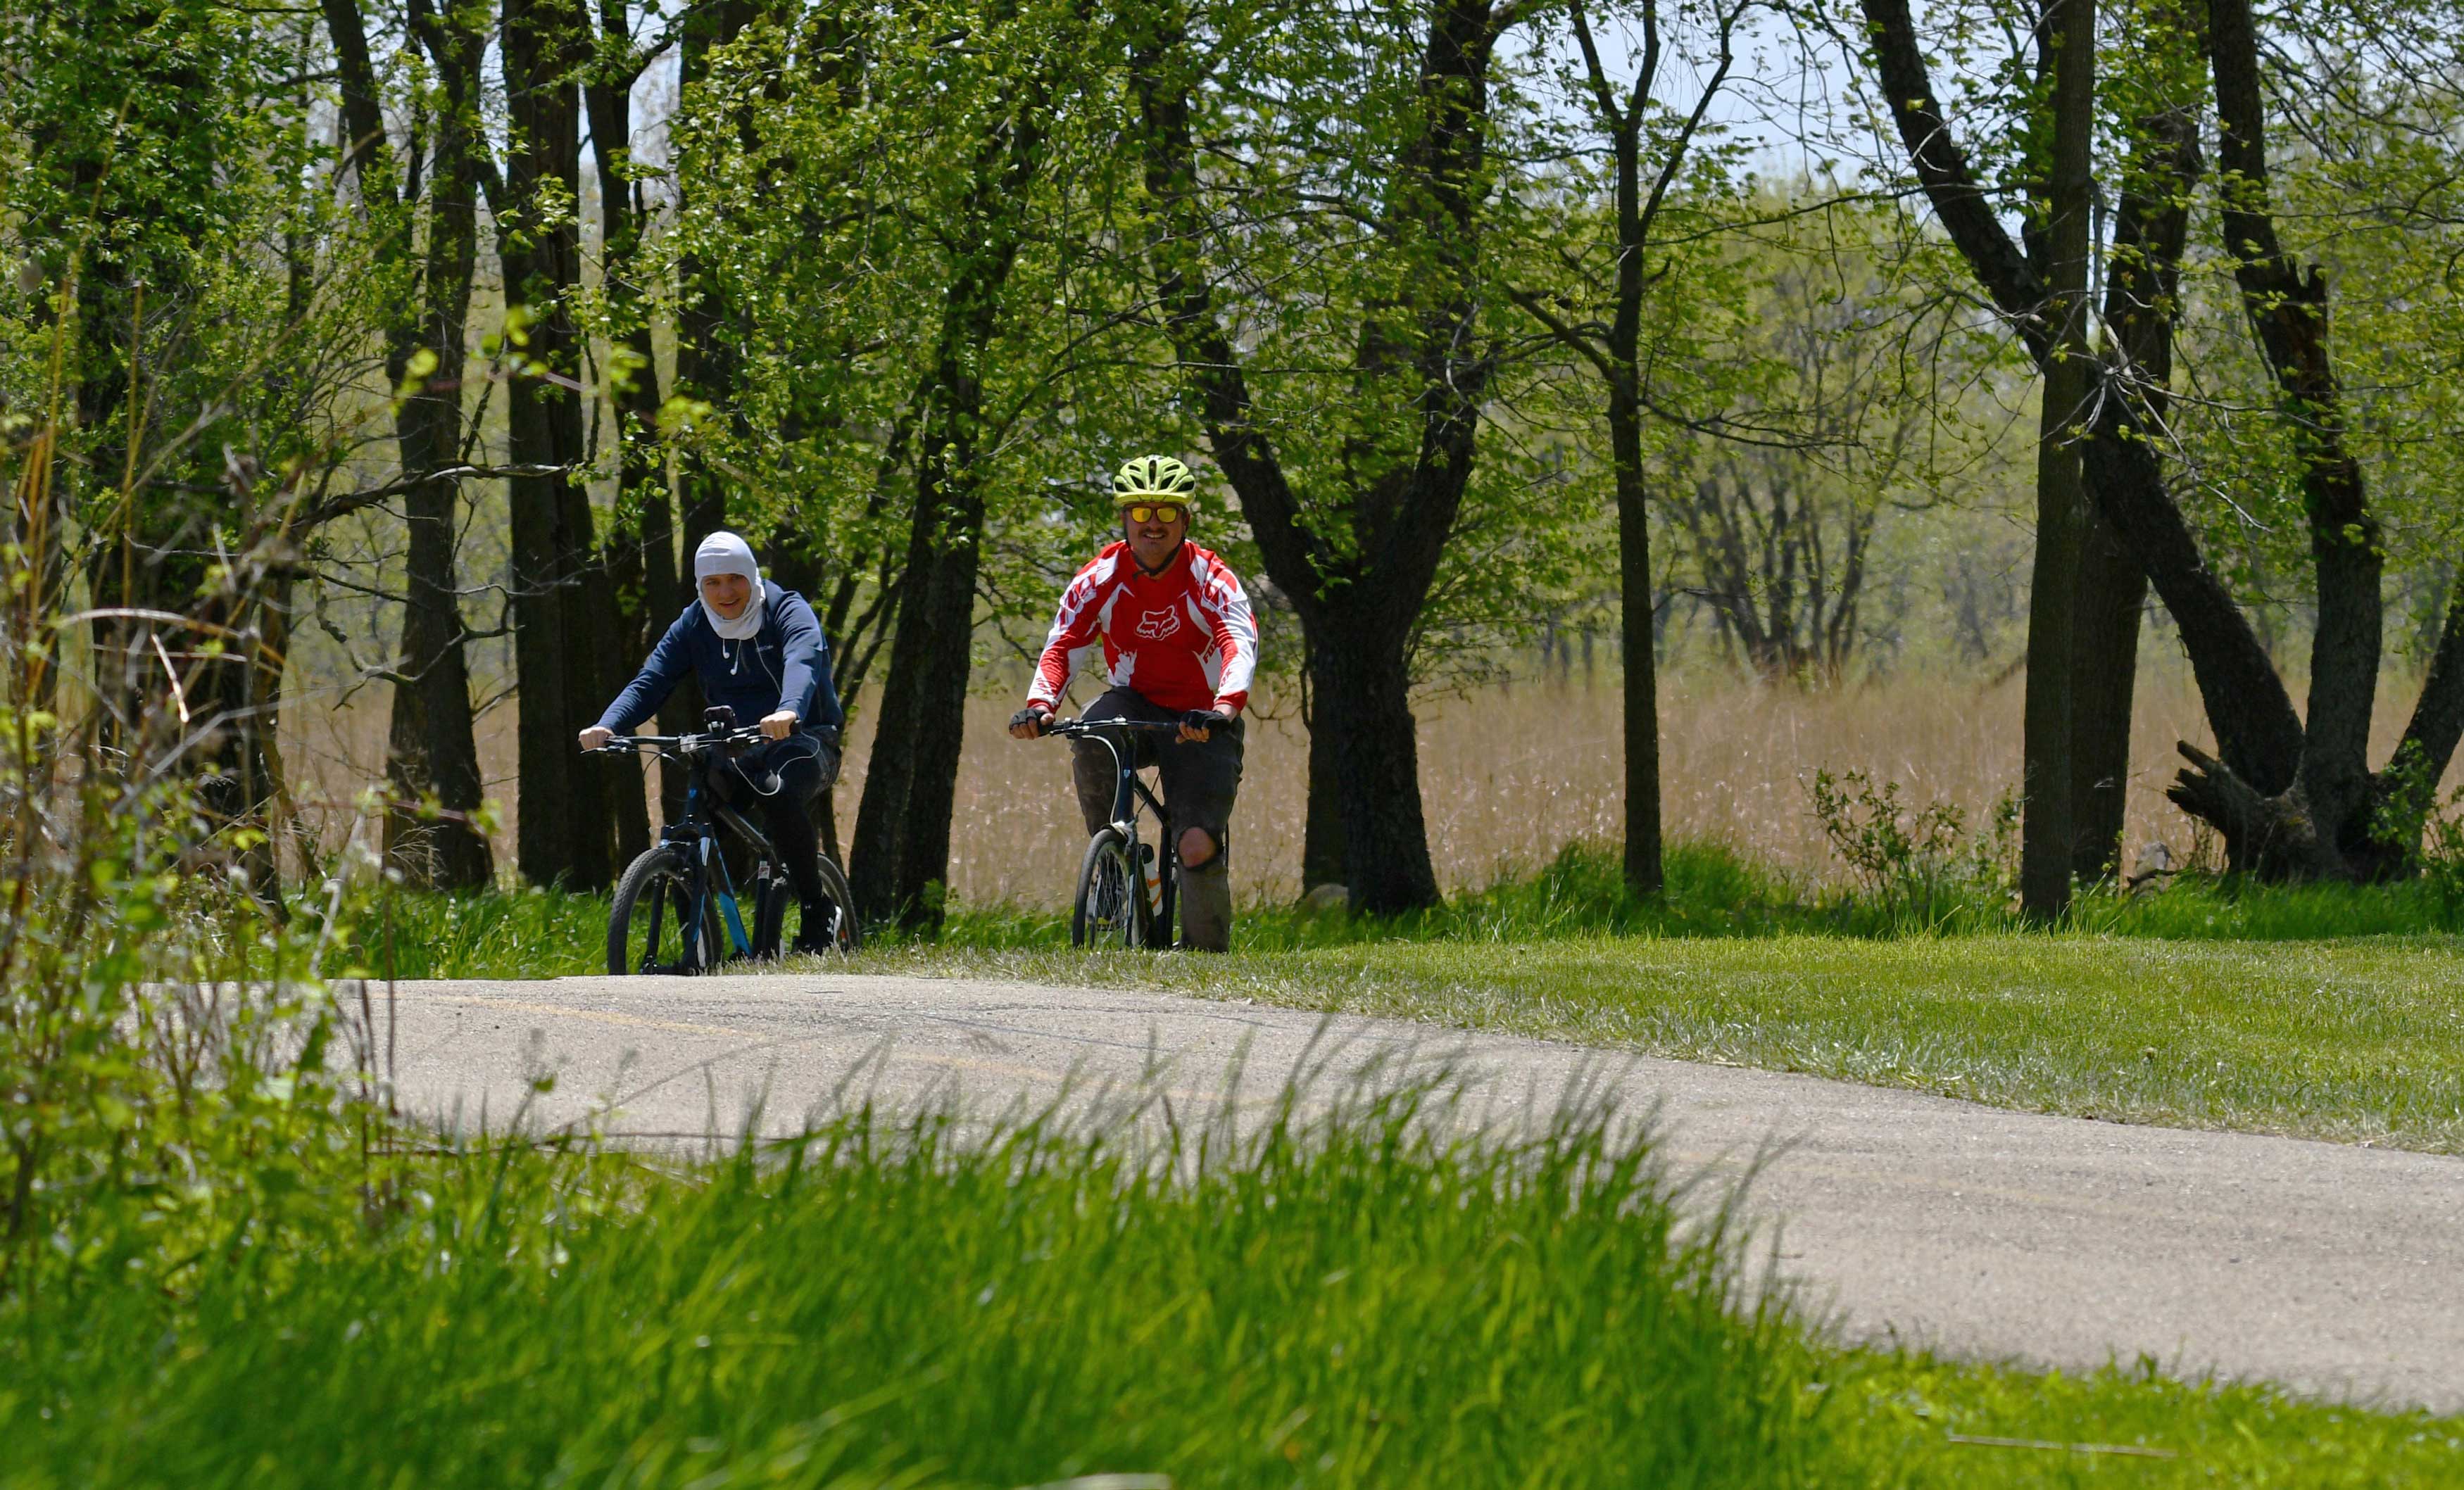 Two bicyclists on a trail.